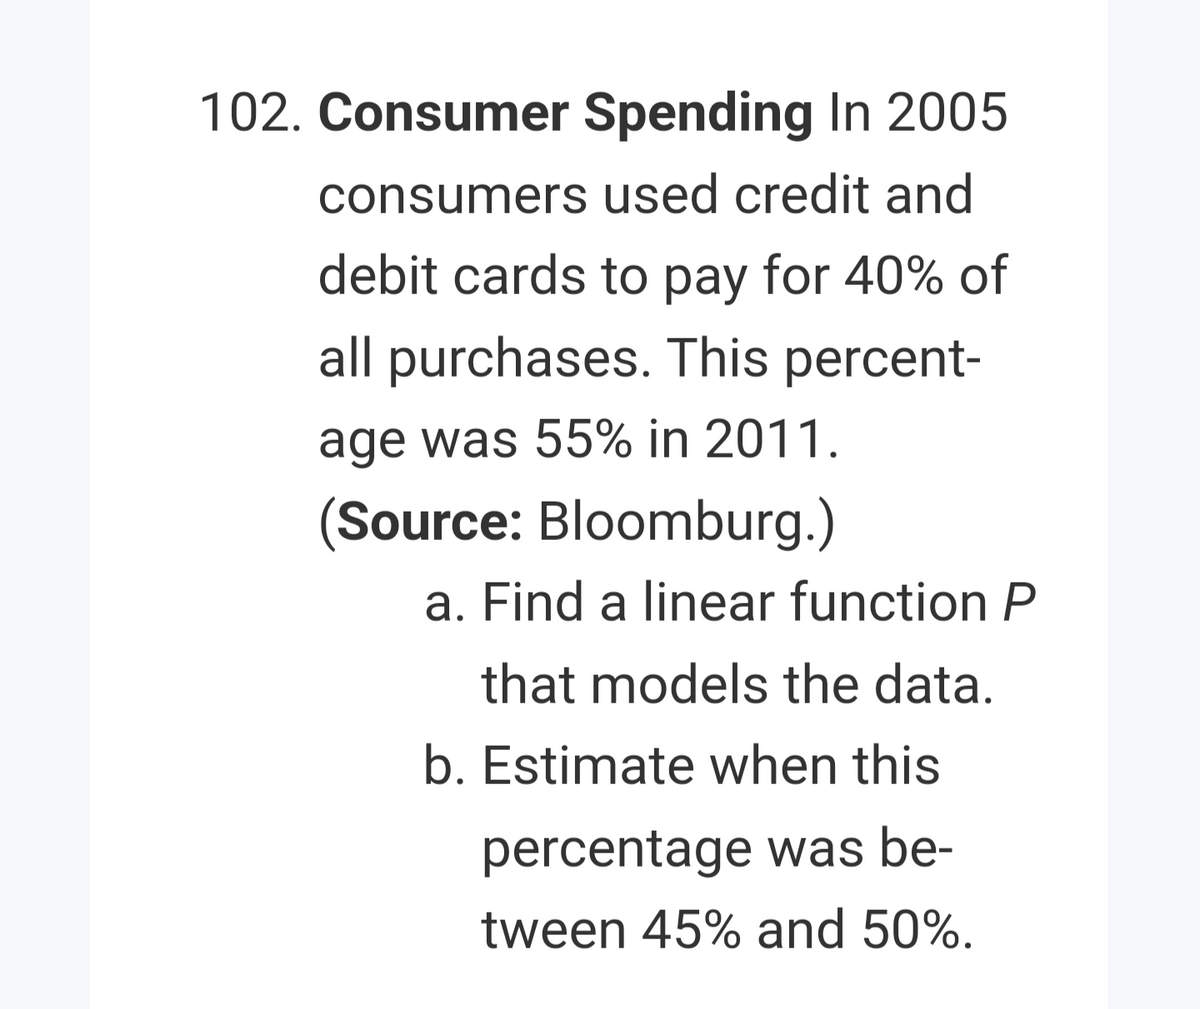 102. Consumer Spending In 2005
consumers used credit and
debit cards to pay for 40% of
all purchases. This percent-
age was 55% in 2011.
(Source: Bloomburg.)
a. Find a linear function P
that models the data.
b. Estimate when this
percentage was be-
tween 45% and 50%.
